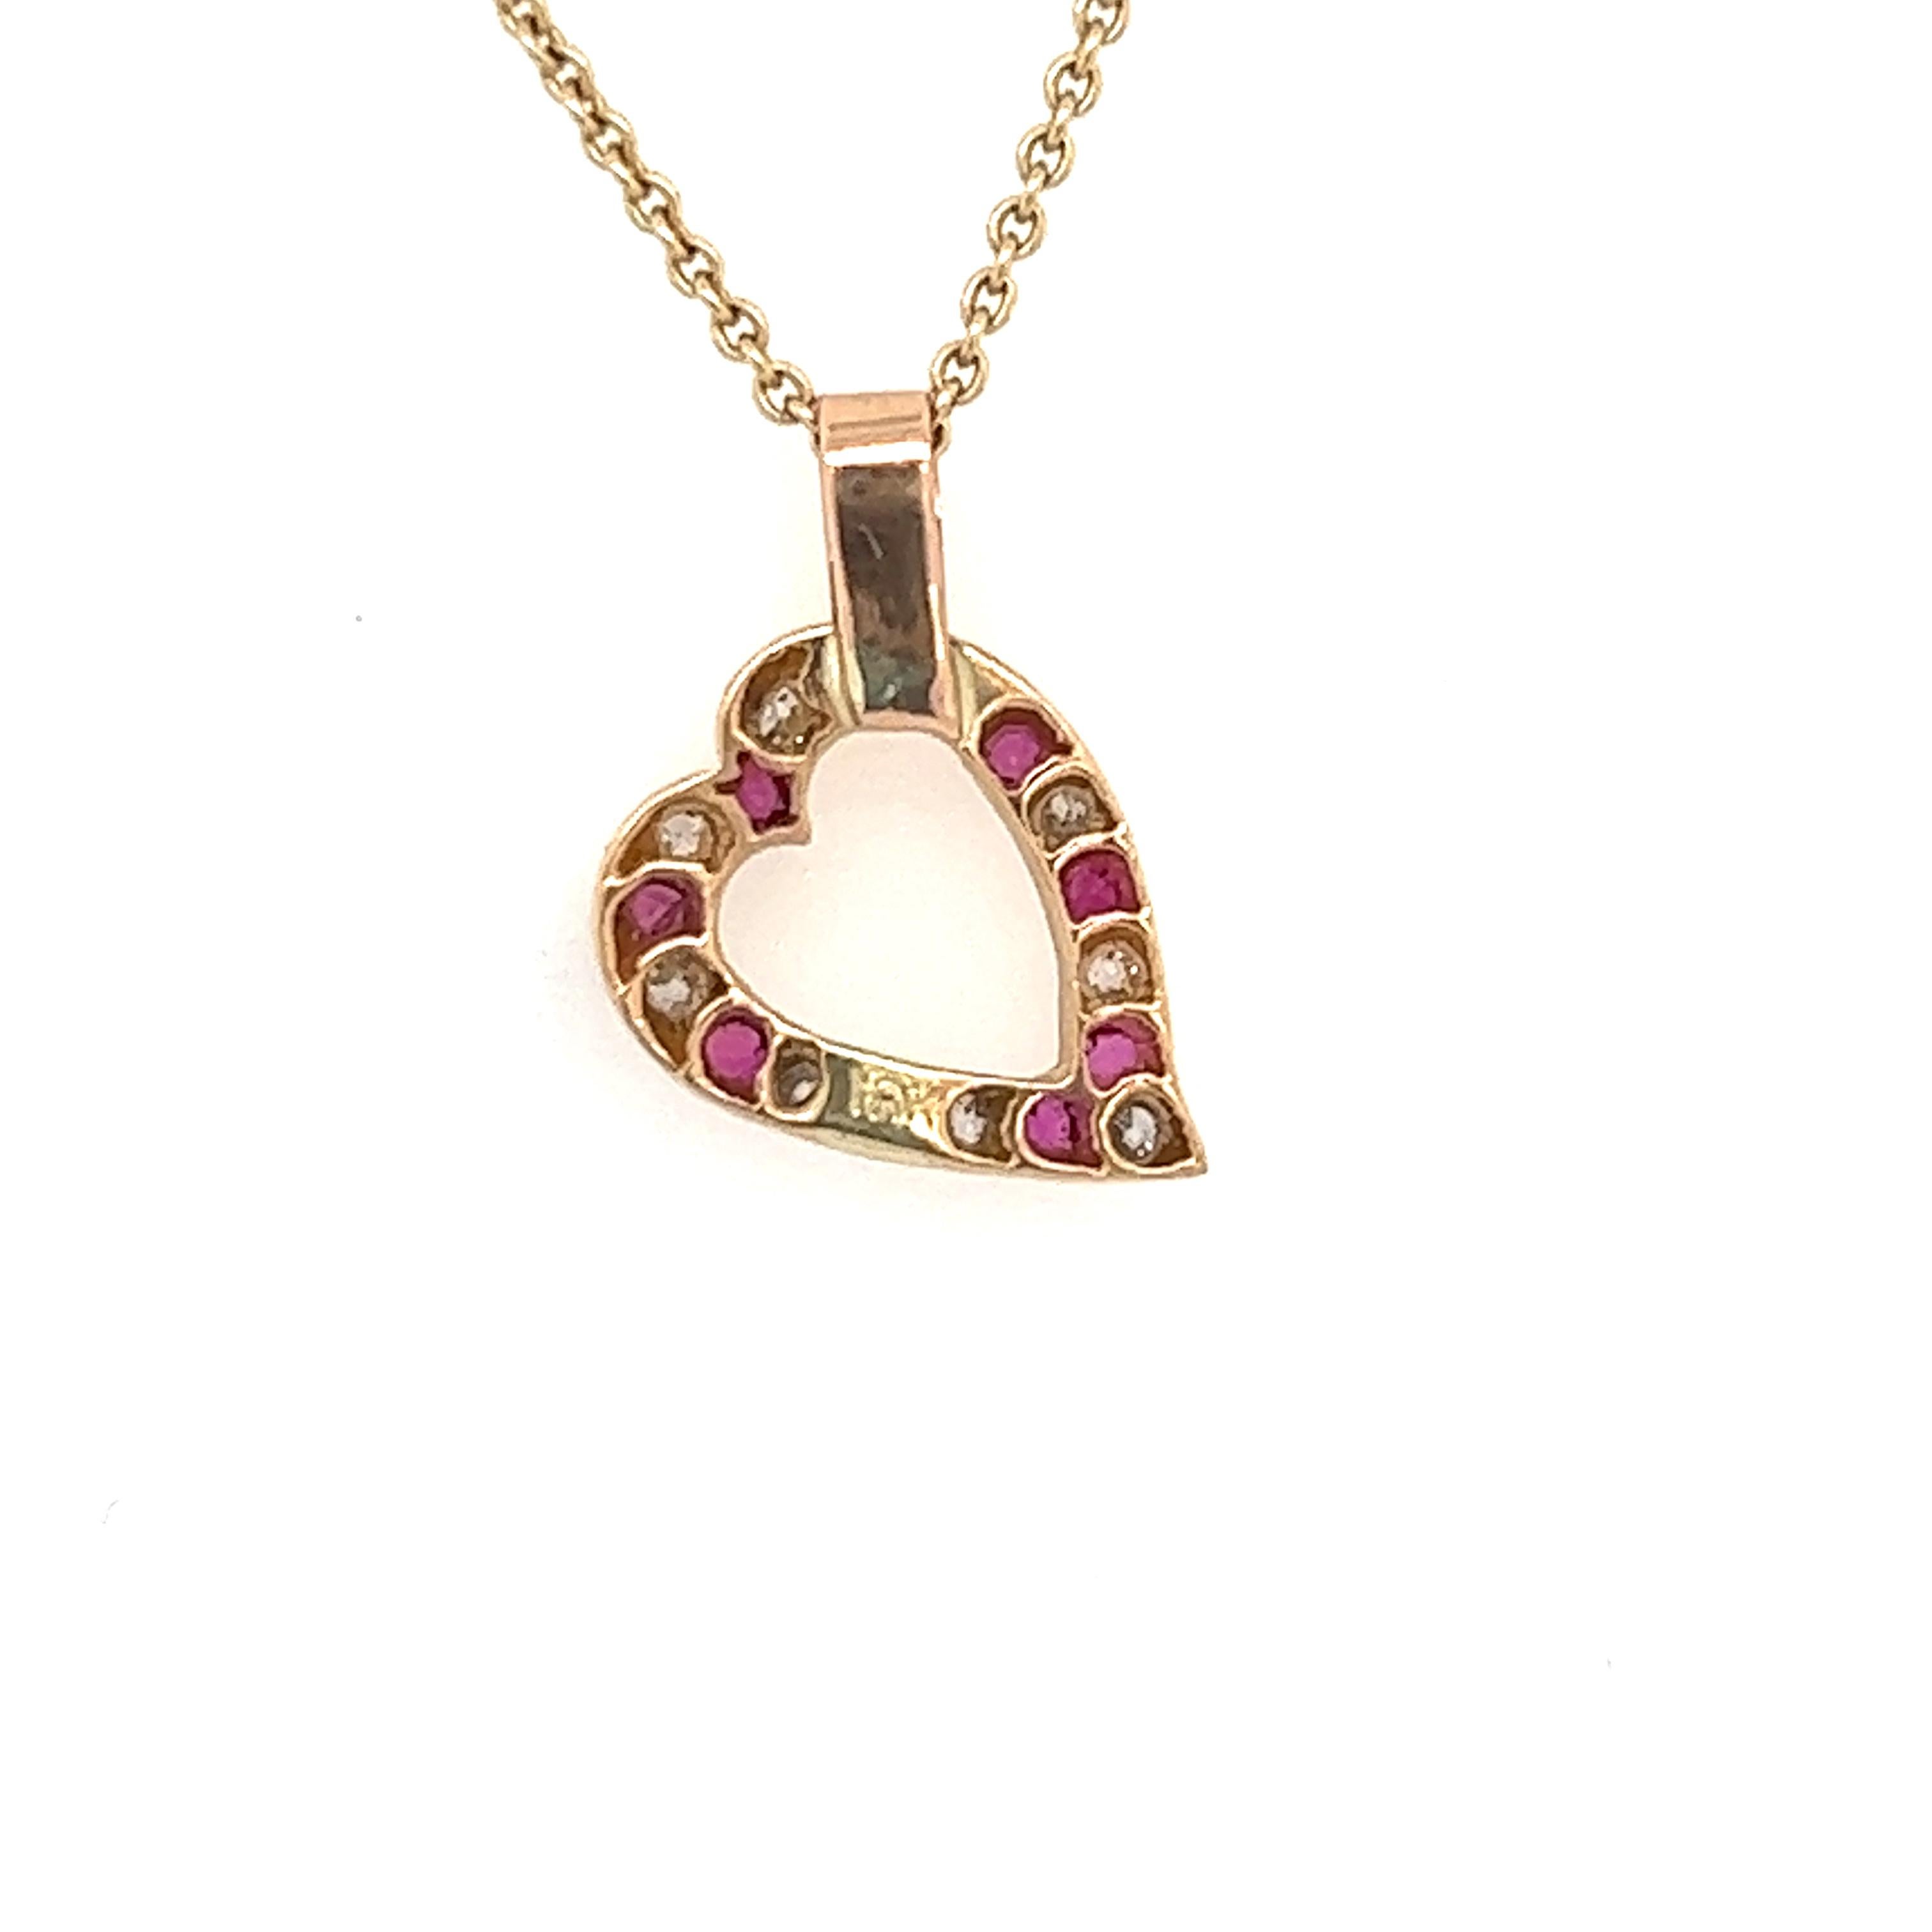 A petite heart pendant.  Comprised of alternating rubies and diamonds set at a jaunty angle.  18K yellow gold.  1/2